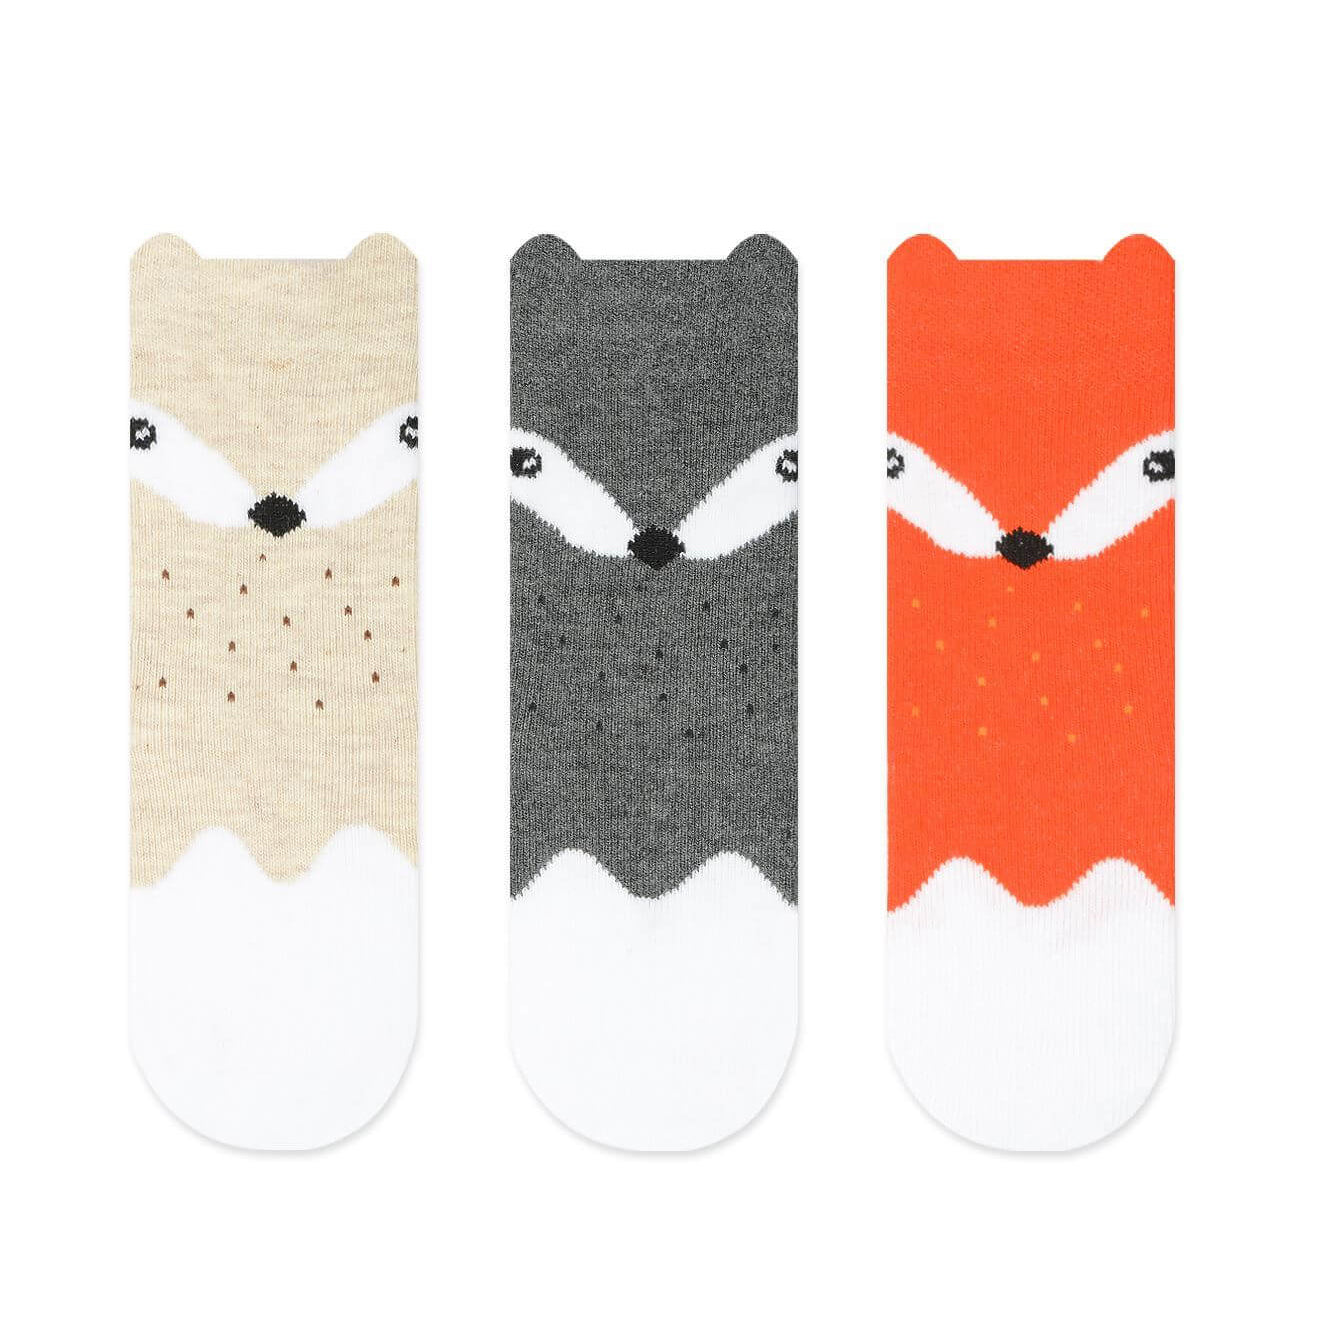 Kid's 3D Fox Under Knee Socks by Sockmate, Knee High Foxes for age 1-11, Gray beige and orange color options